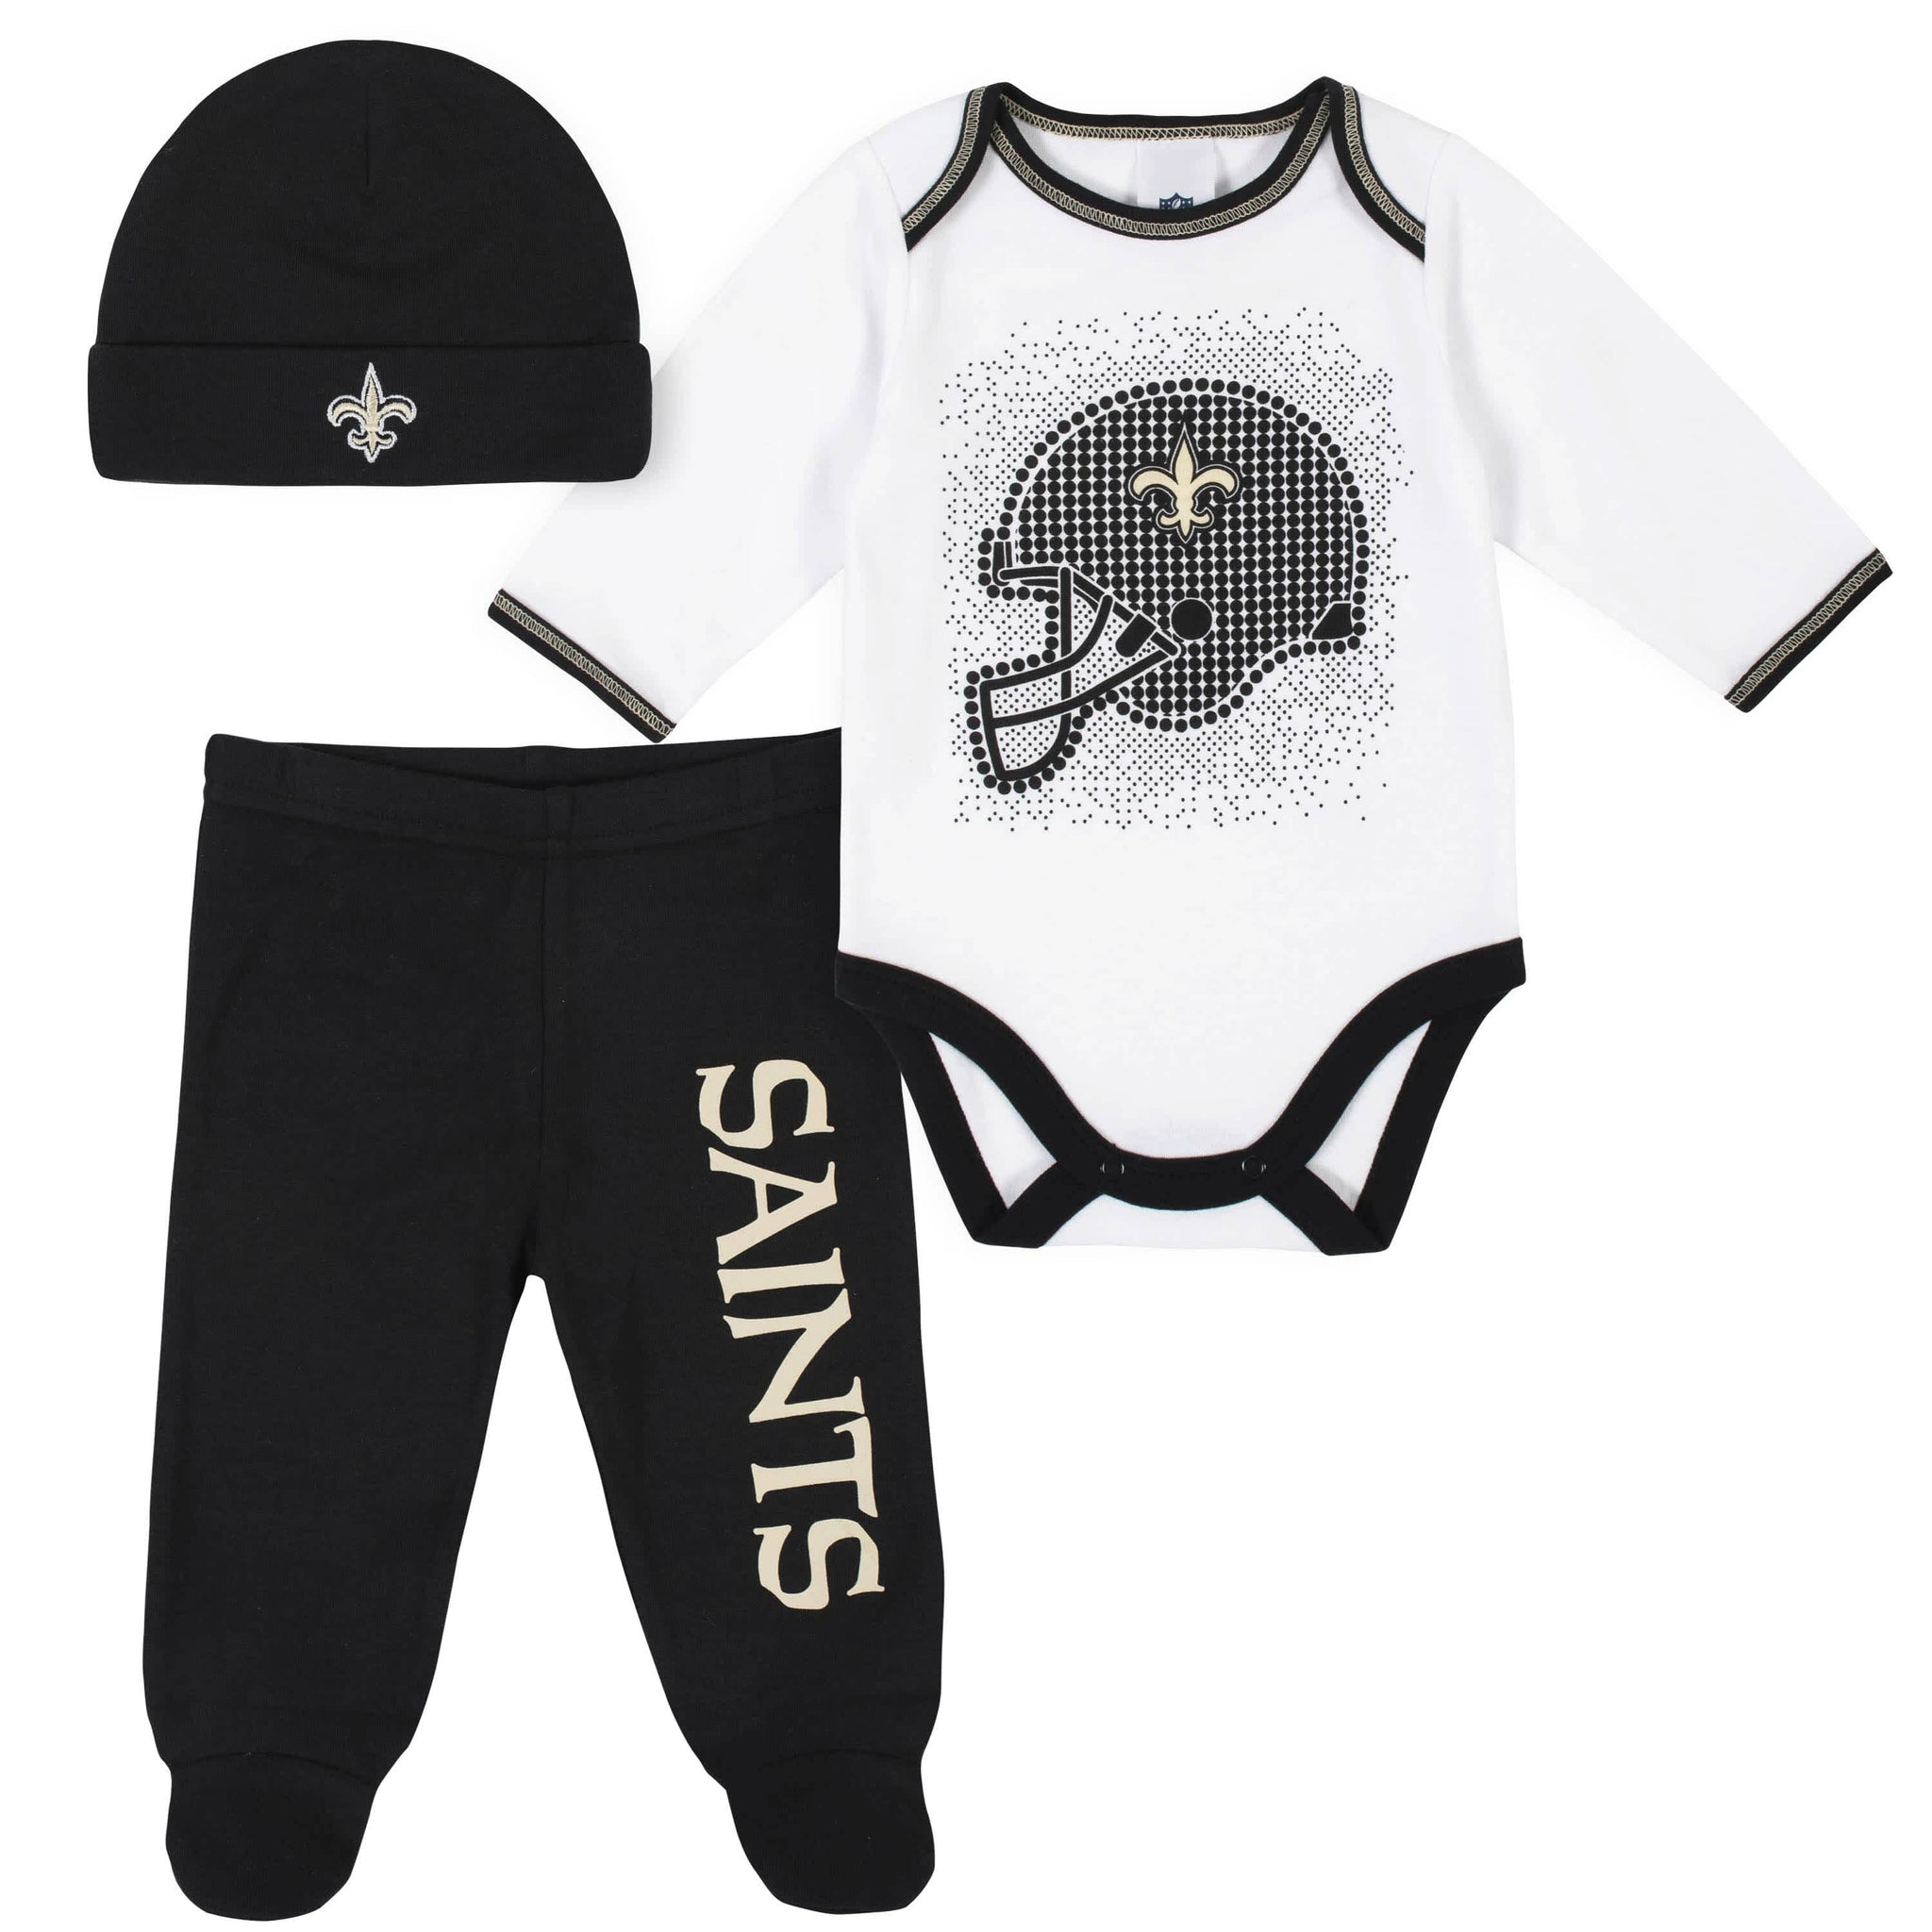 new orleans saints baby jersey